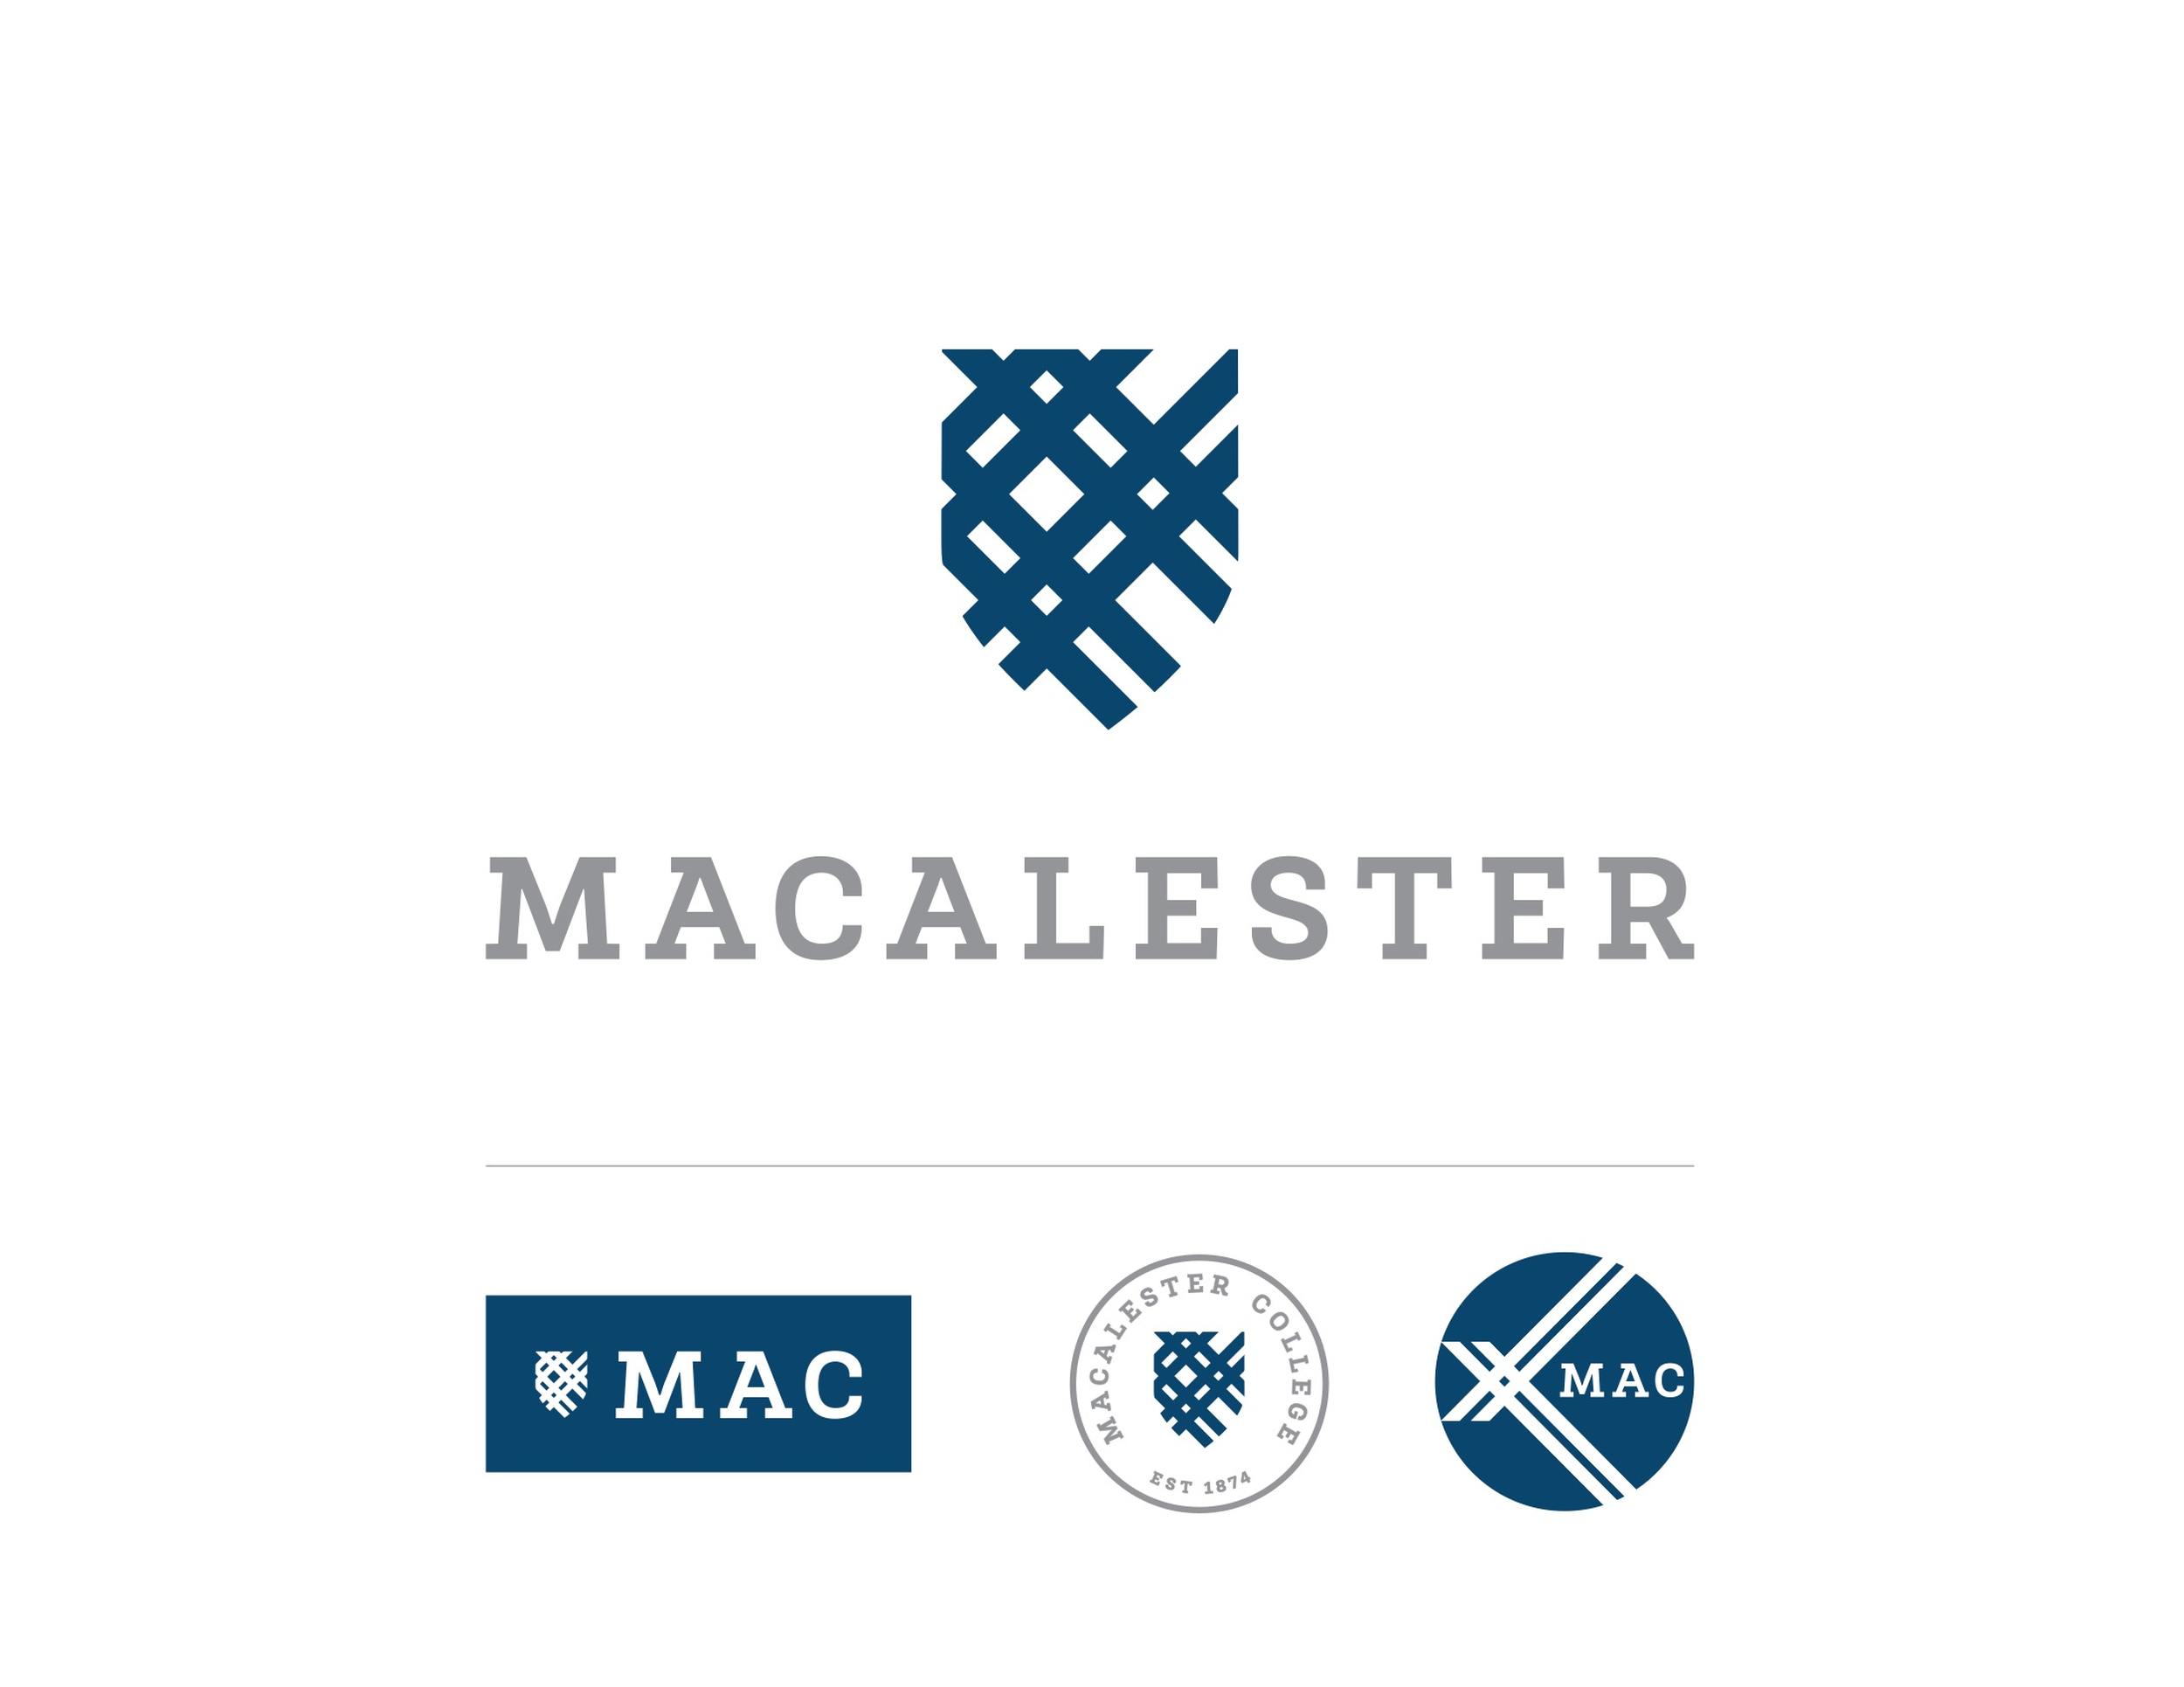 White and Blue College Logo - Macalester College Brand Identity - The Show MN 2018 Winners